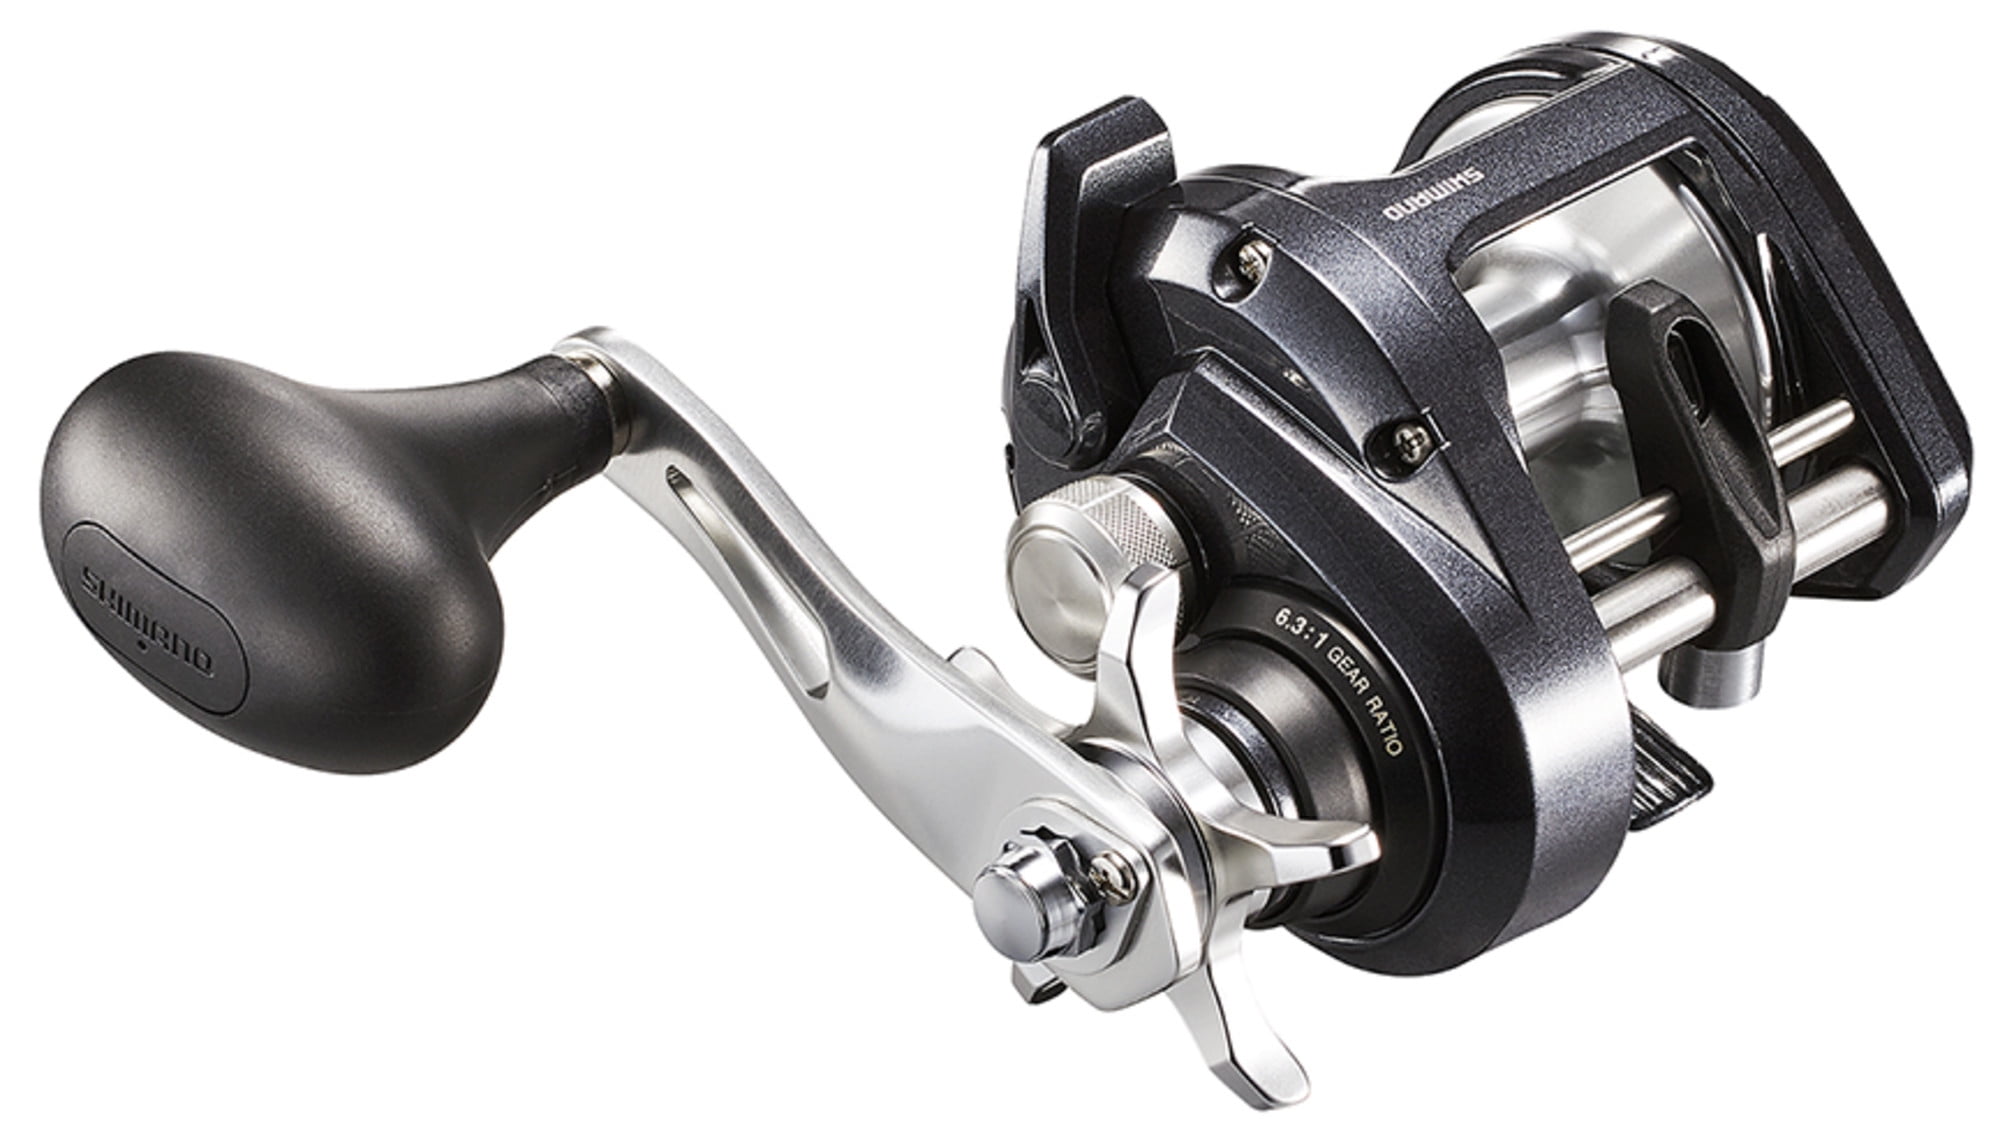 Shimano Electric Reel 19 PLAYS 600 Right 5.5:1 Saltwater Fishing IN BO